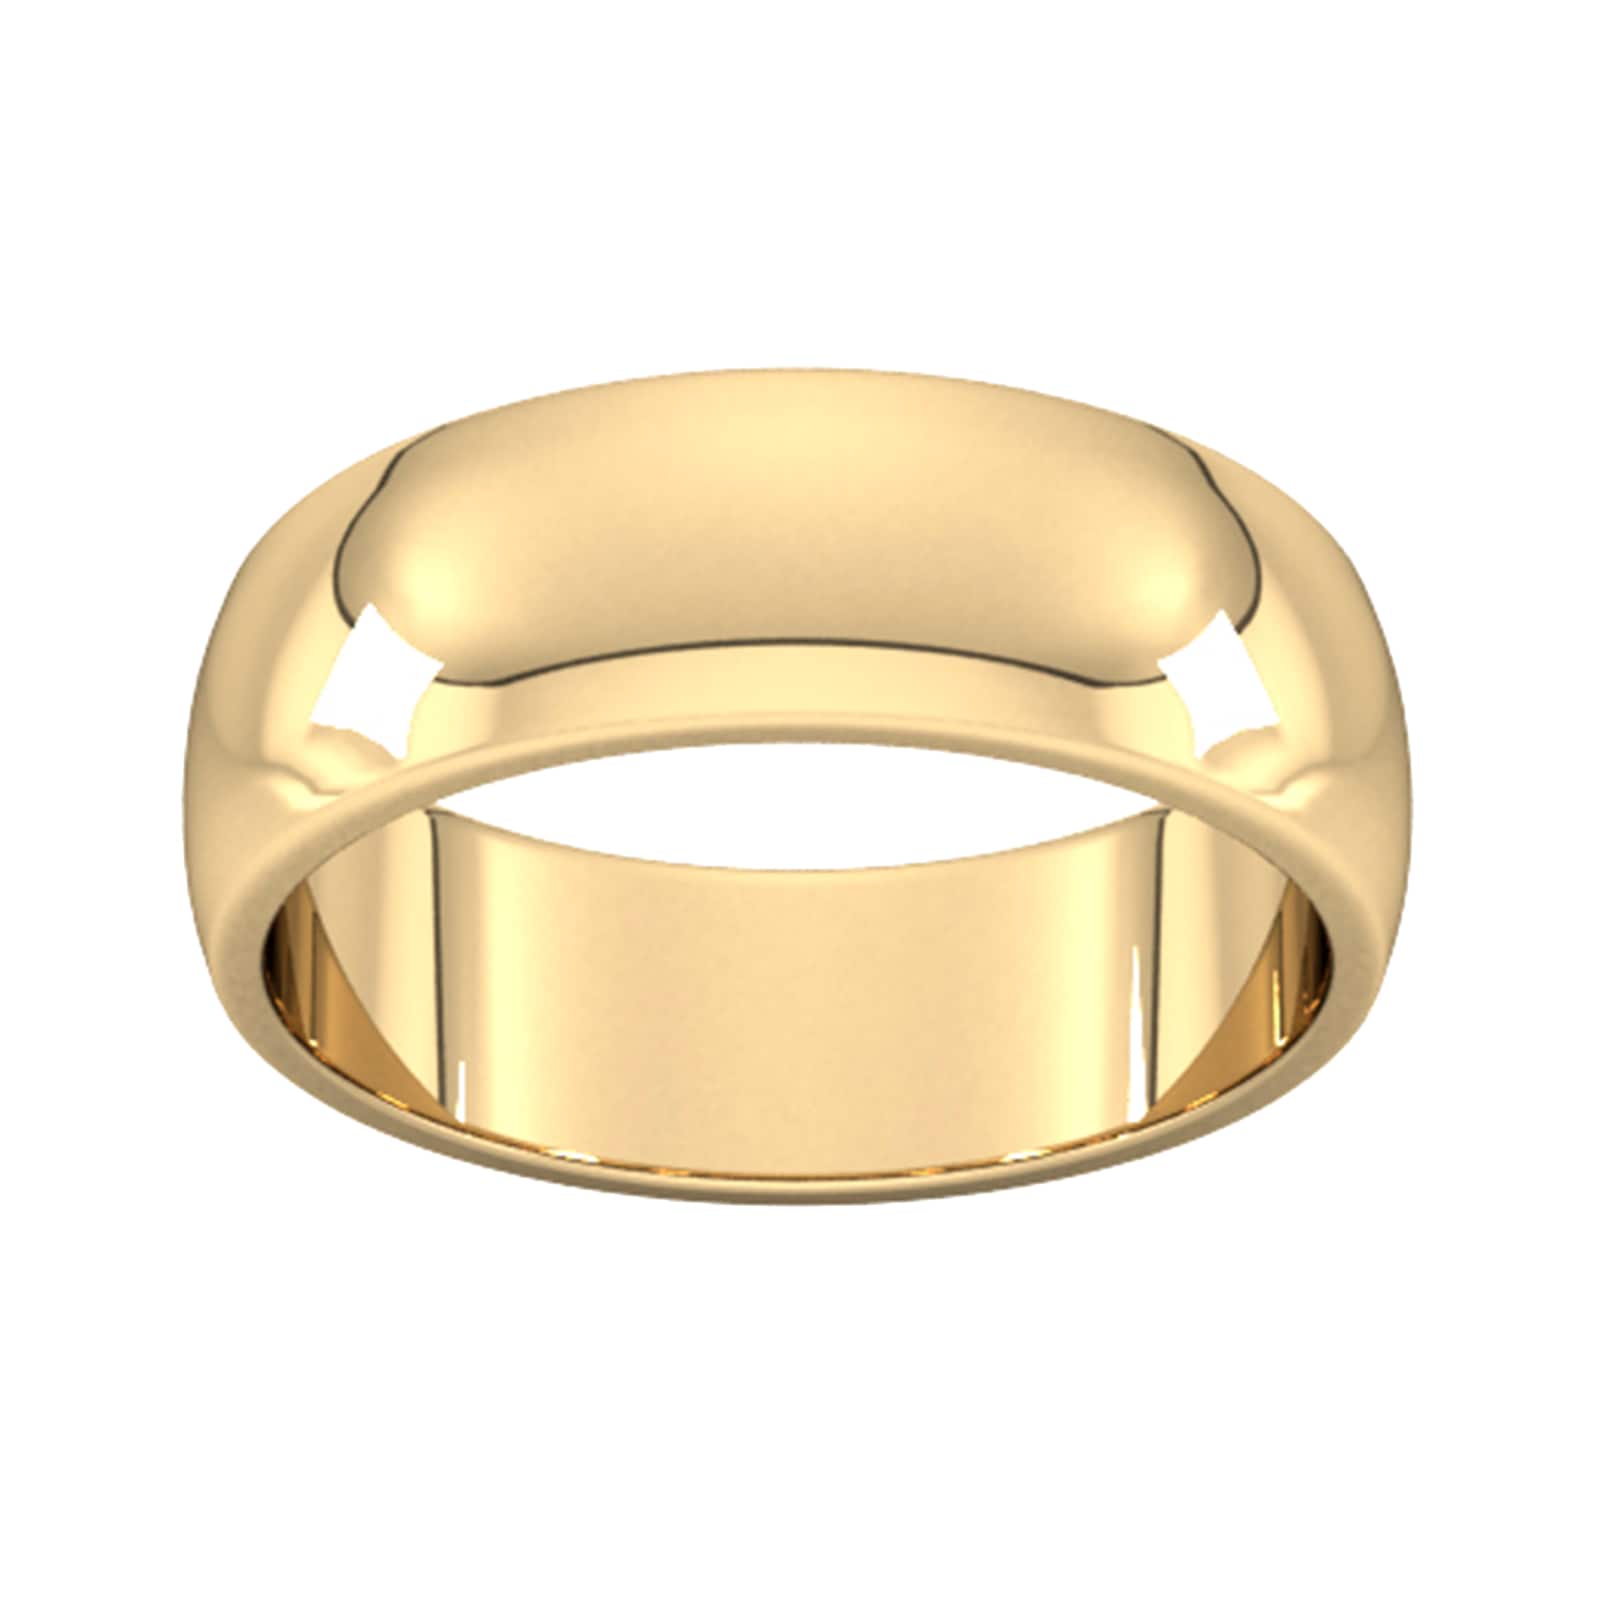 7mm D Shape Heavy Wedding Ring In 9 Carat Yellow Gold - Ring Size U